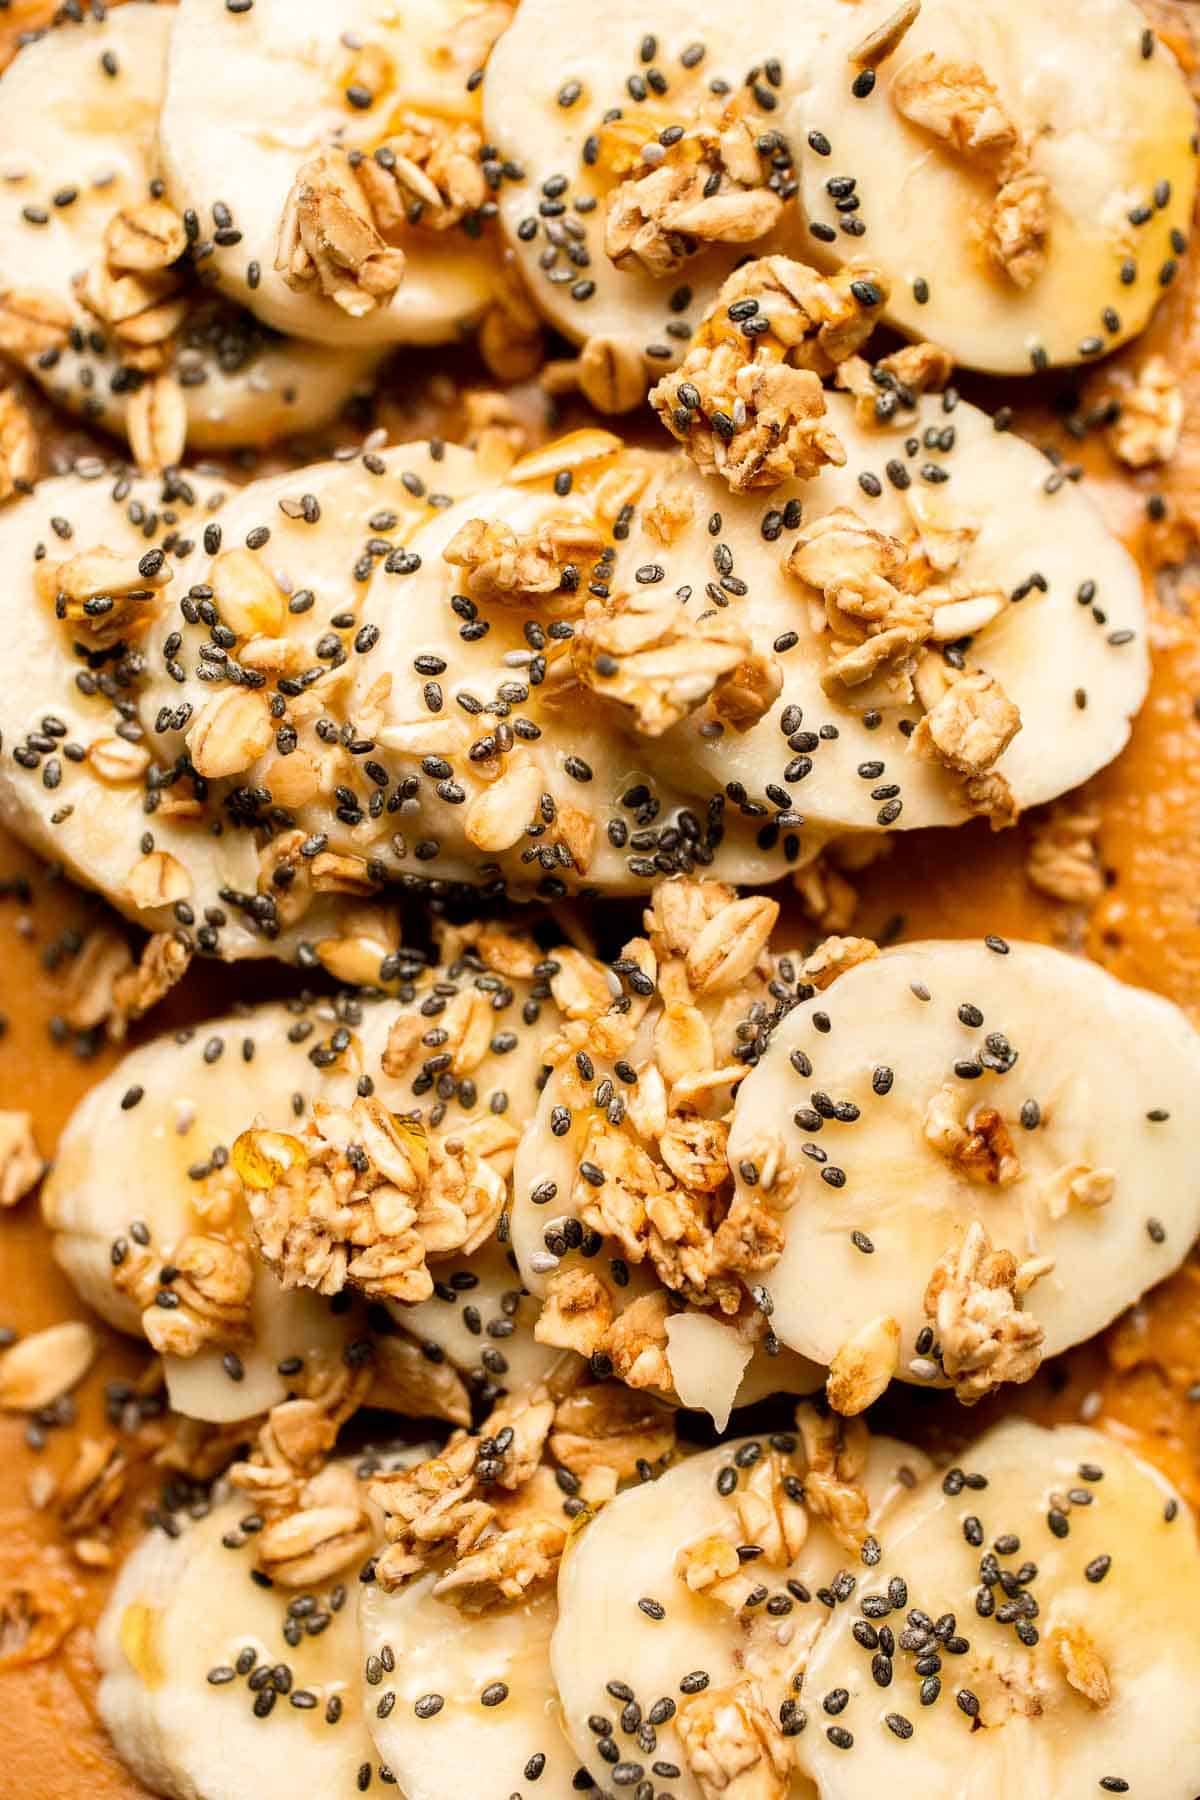 Peanut Butter Banana Toast is an incredibly simple yet healthy breakfast that's ready in a just 5 minutes. It's quick, satisfying, and protein-packed. | aheadofthyme.com